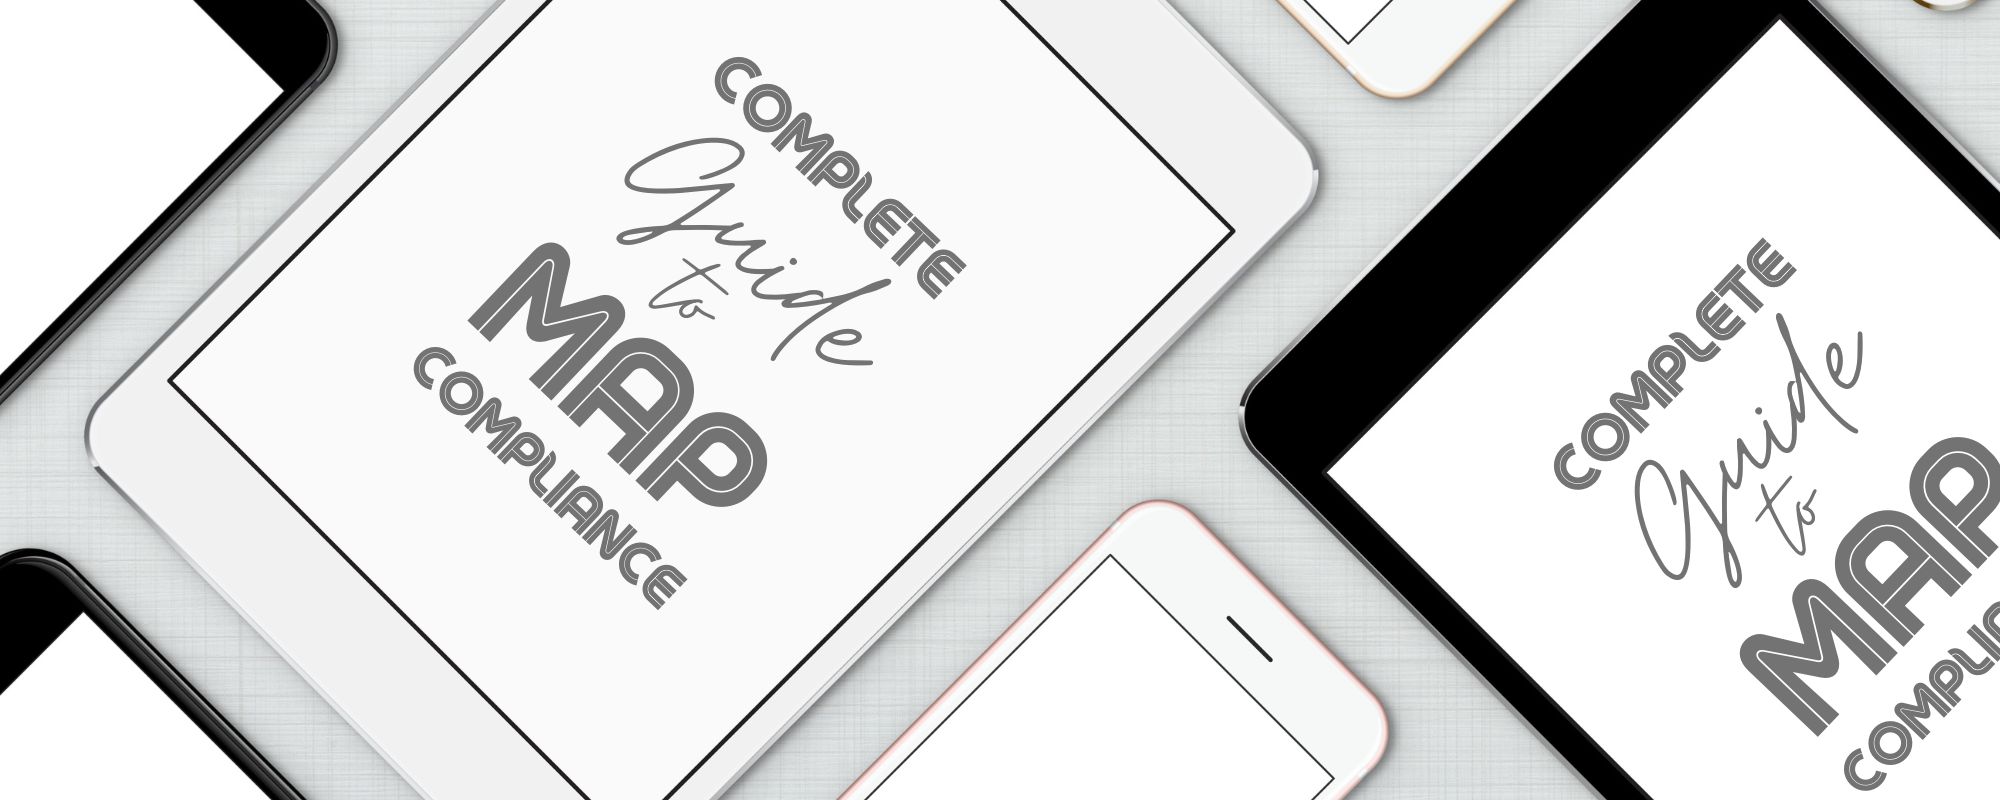 "Complete Guide to MAP Compliance" written on various device screens - The Complete Guide to MAP Compliance